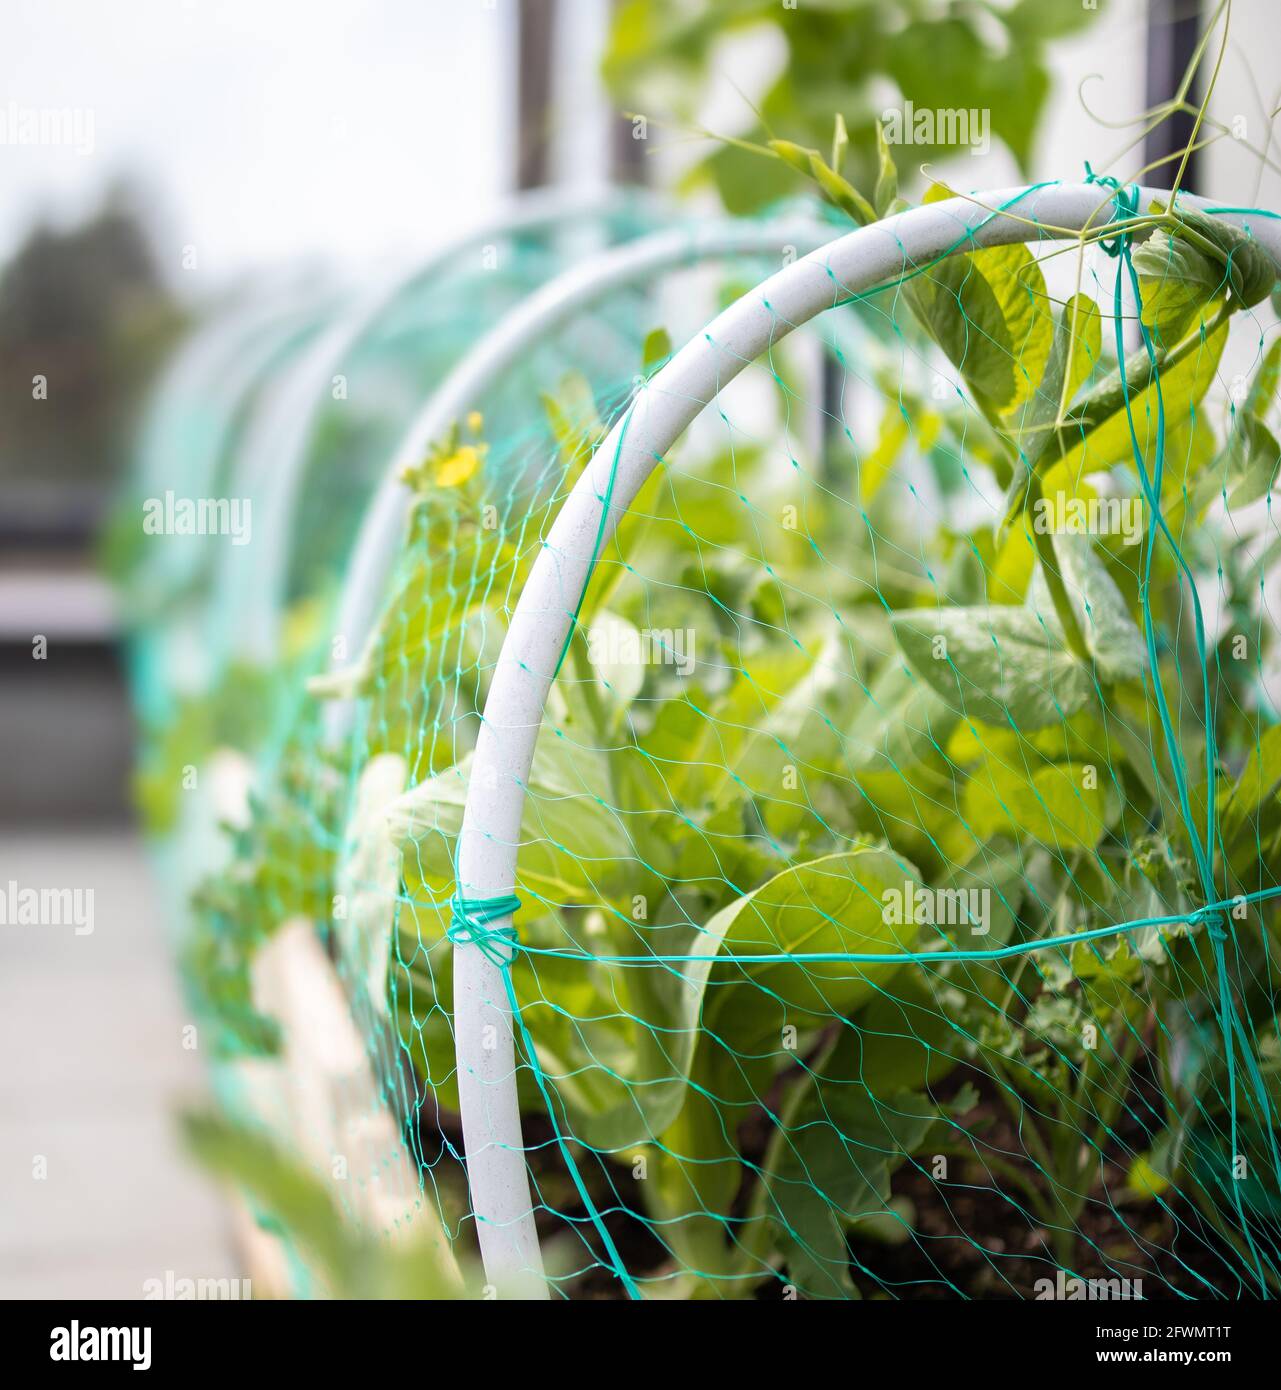 Garden vegetables covered with insect netting. Pesticide-free solution to protect brassicas, such as kale, pak choy and broccoli, from the cabbage mot Stock Photo